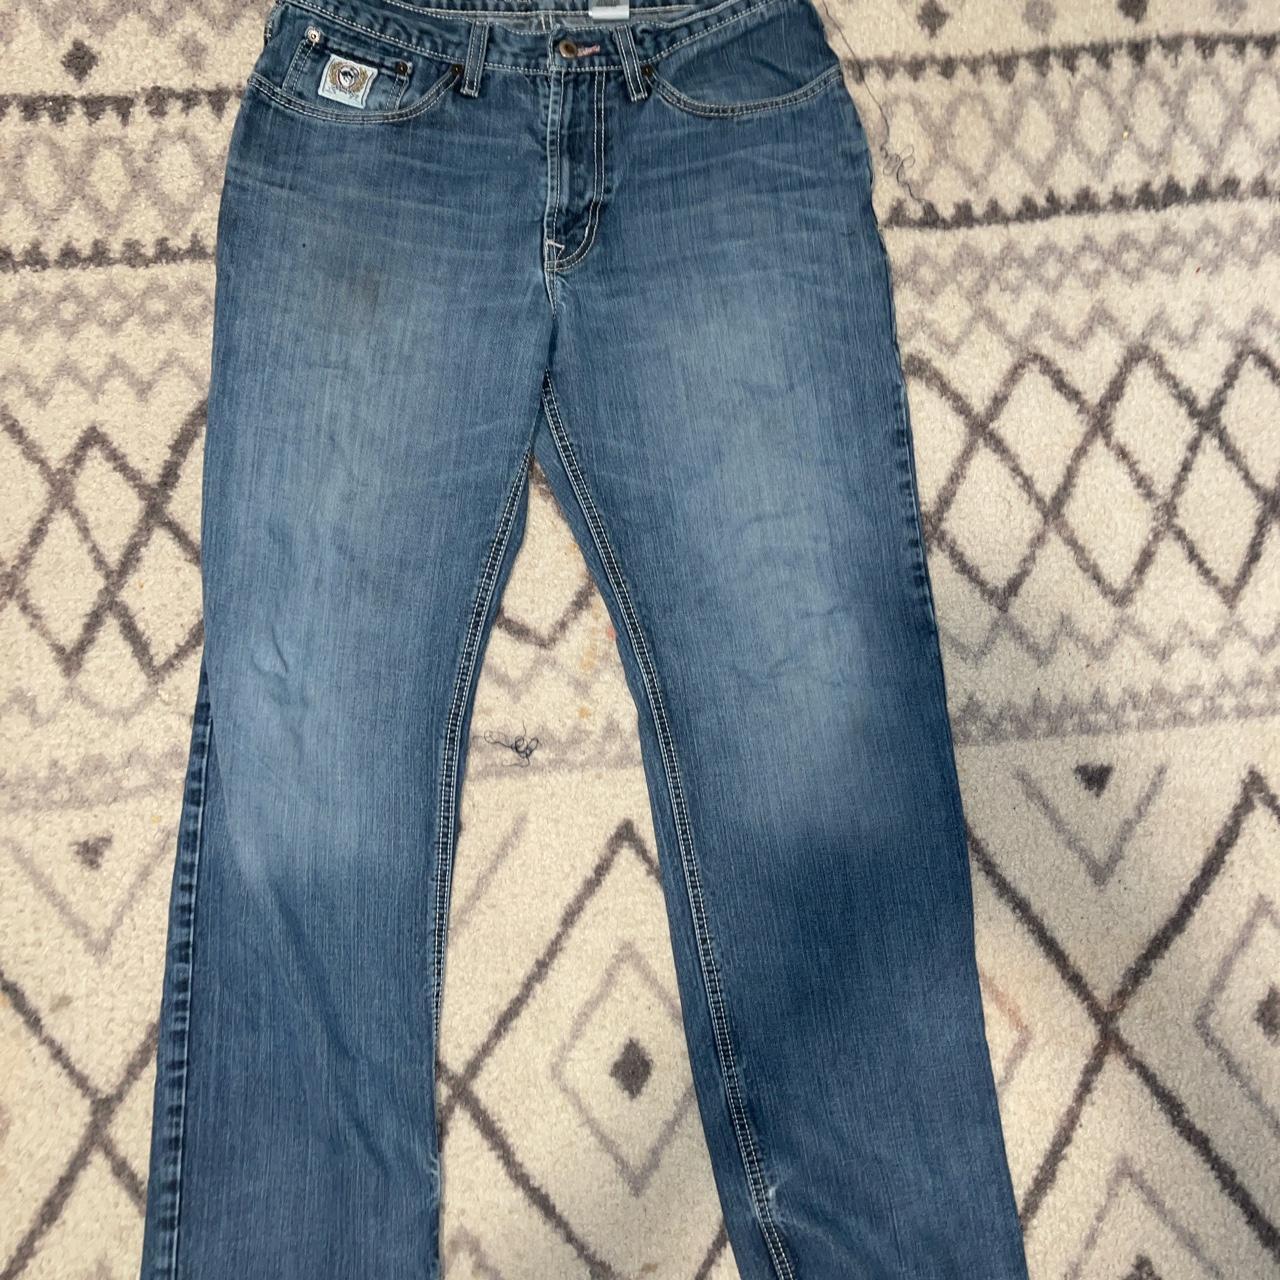 Cinch Jeans 33X34 Nice and baggy - Depop